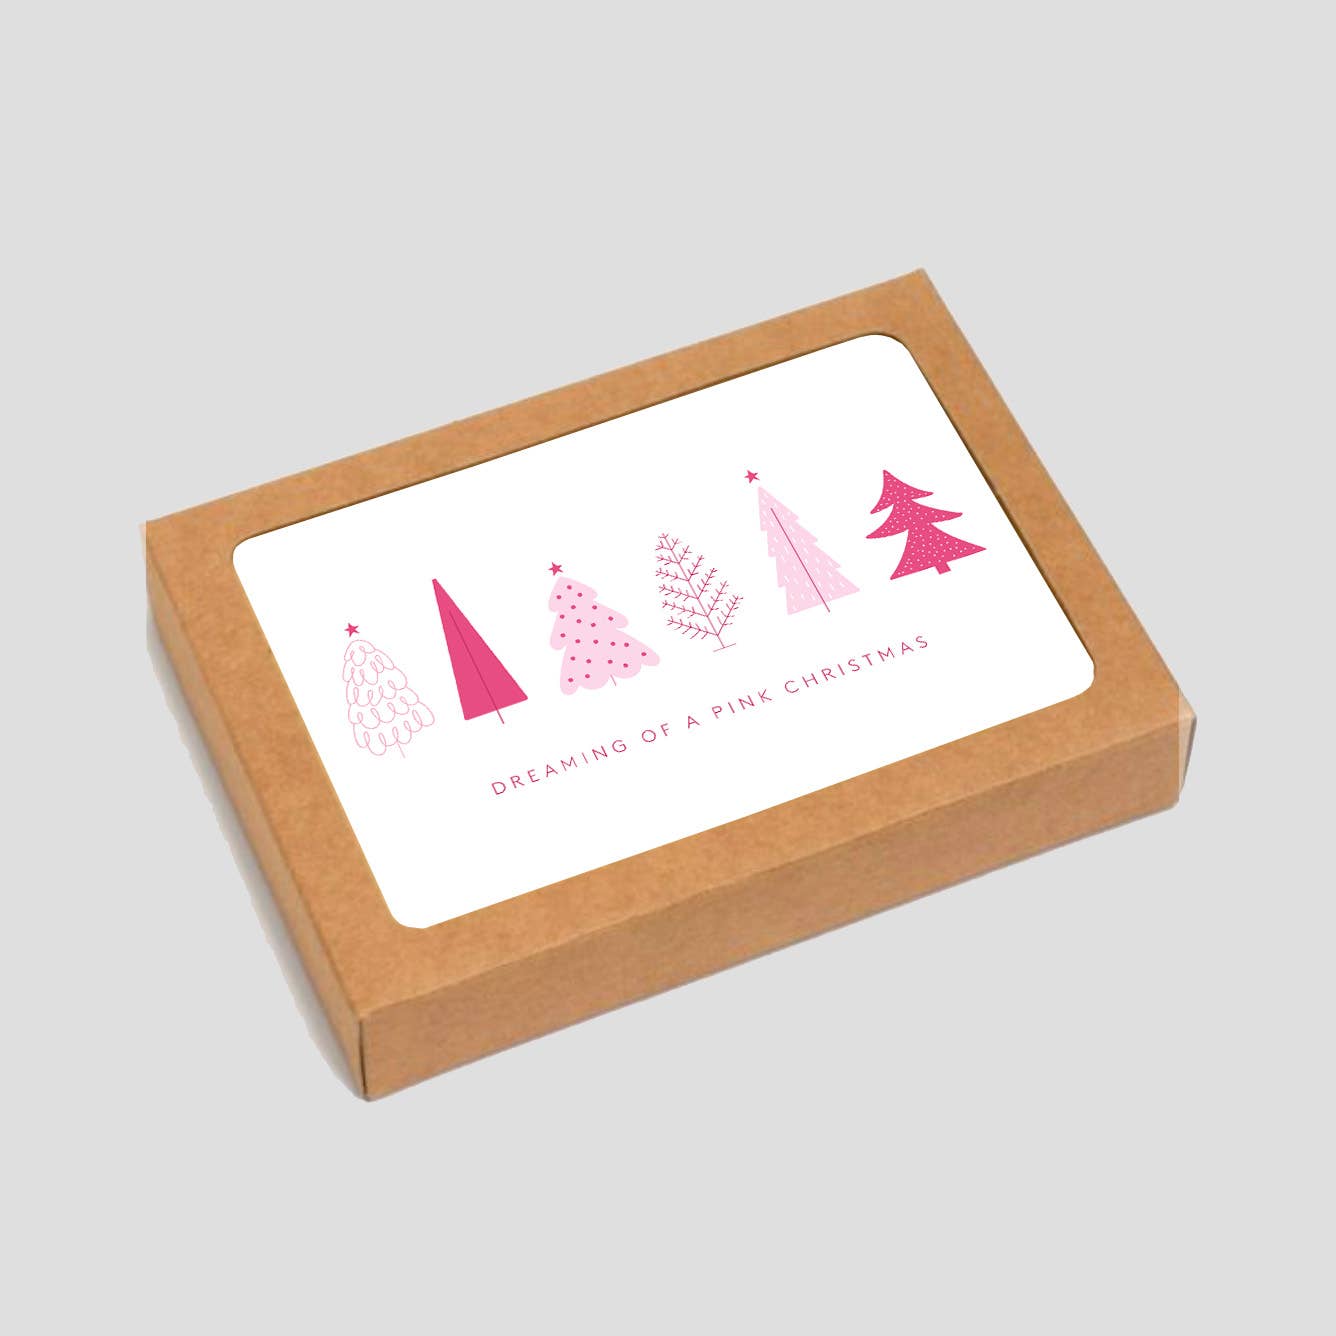 Dreaming of a Pink Christmas: Single Card